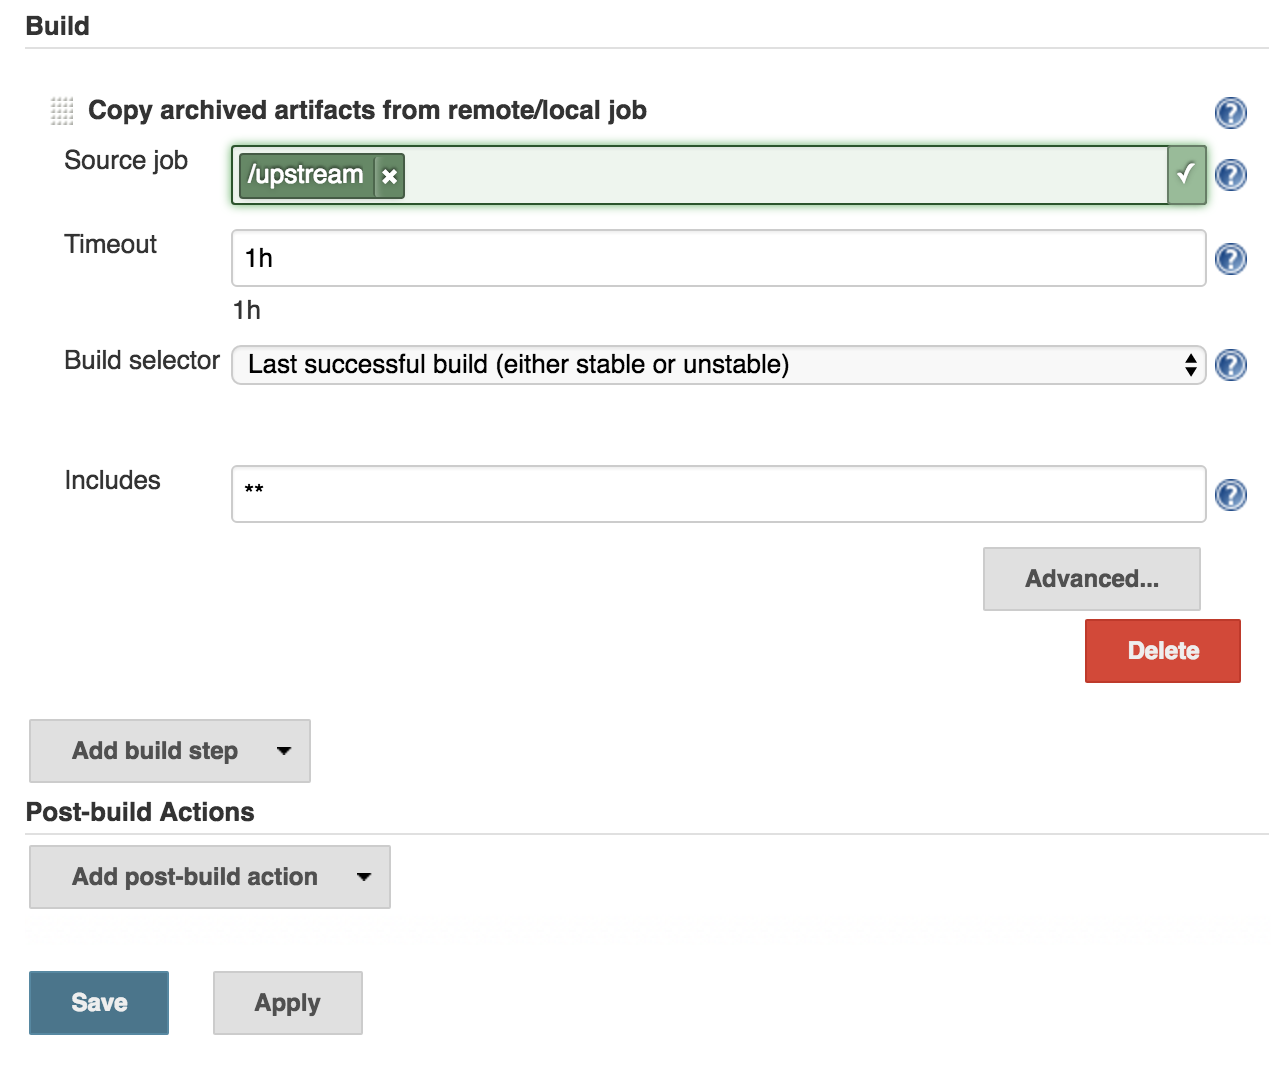 Copy archived artifacts from remote/local jobs build step